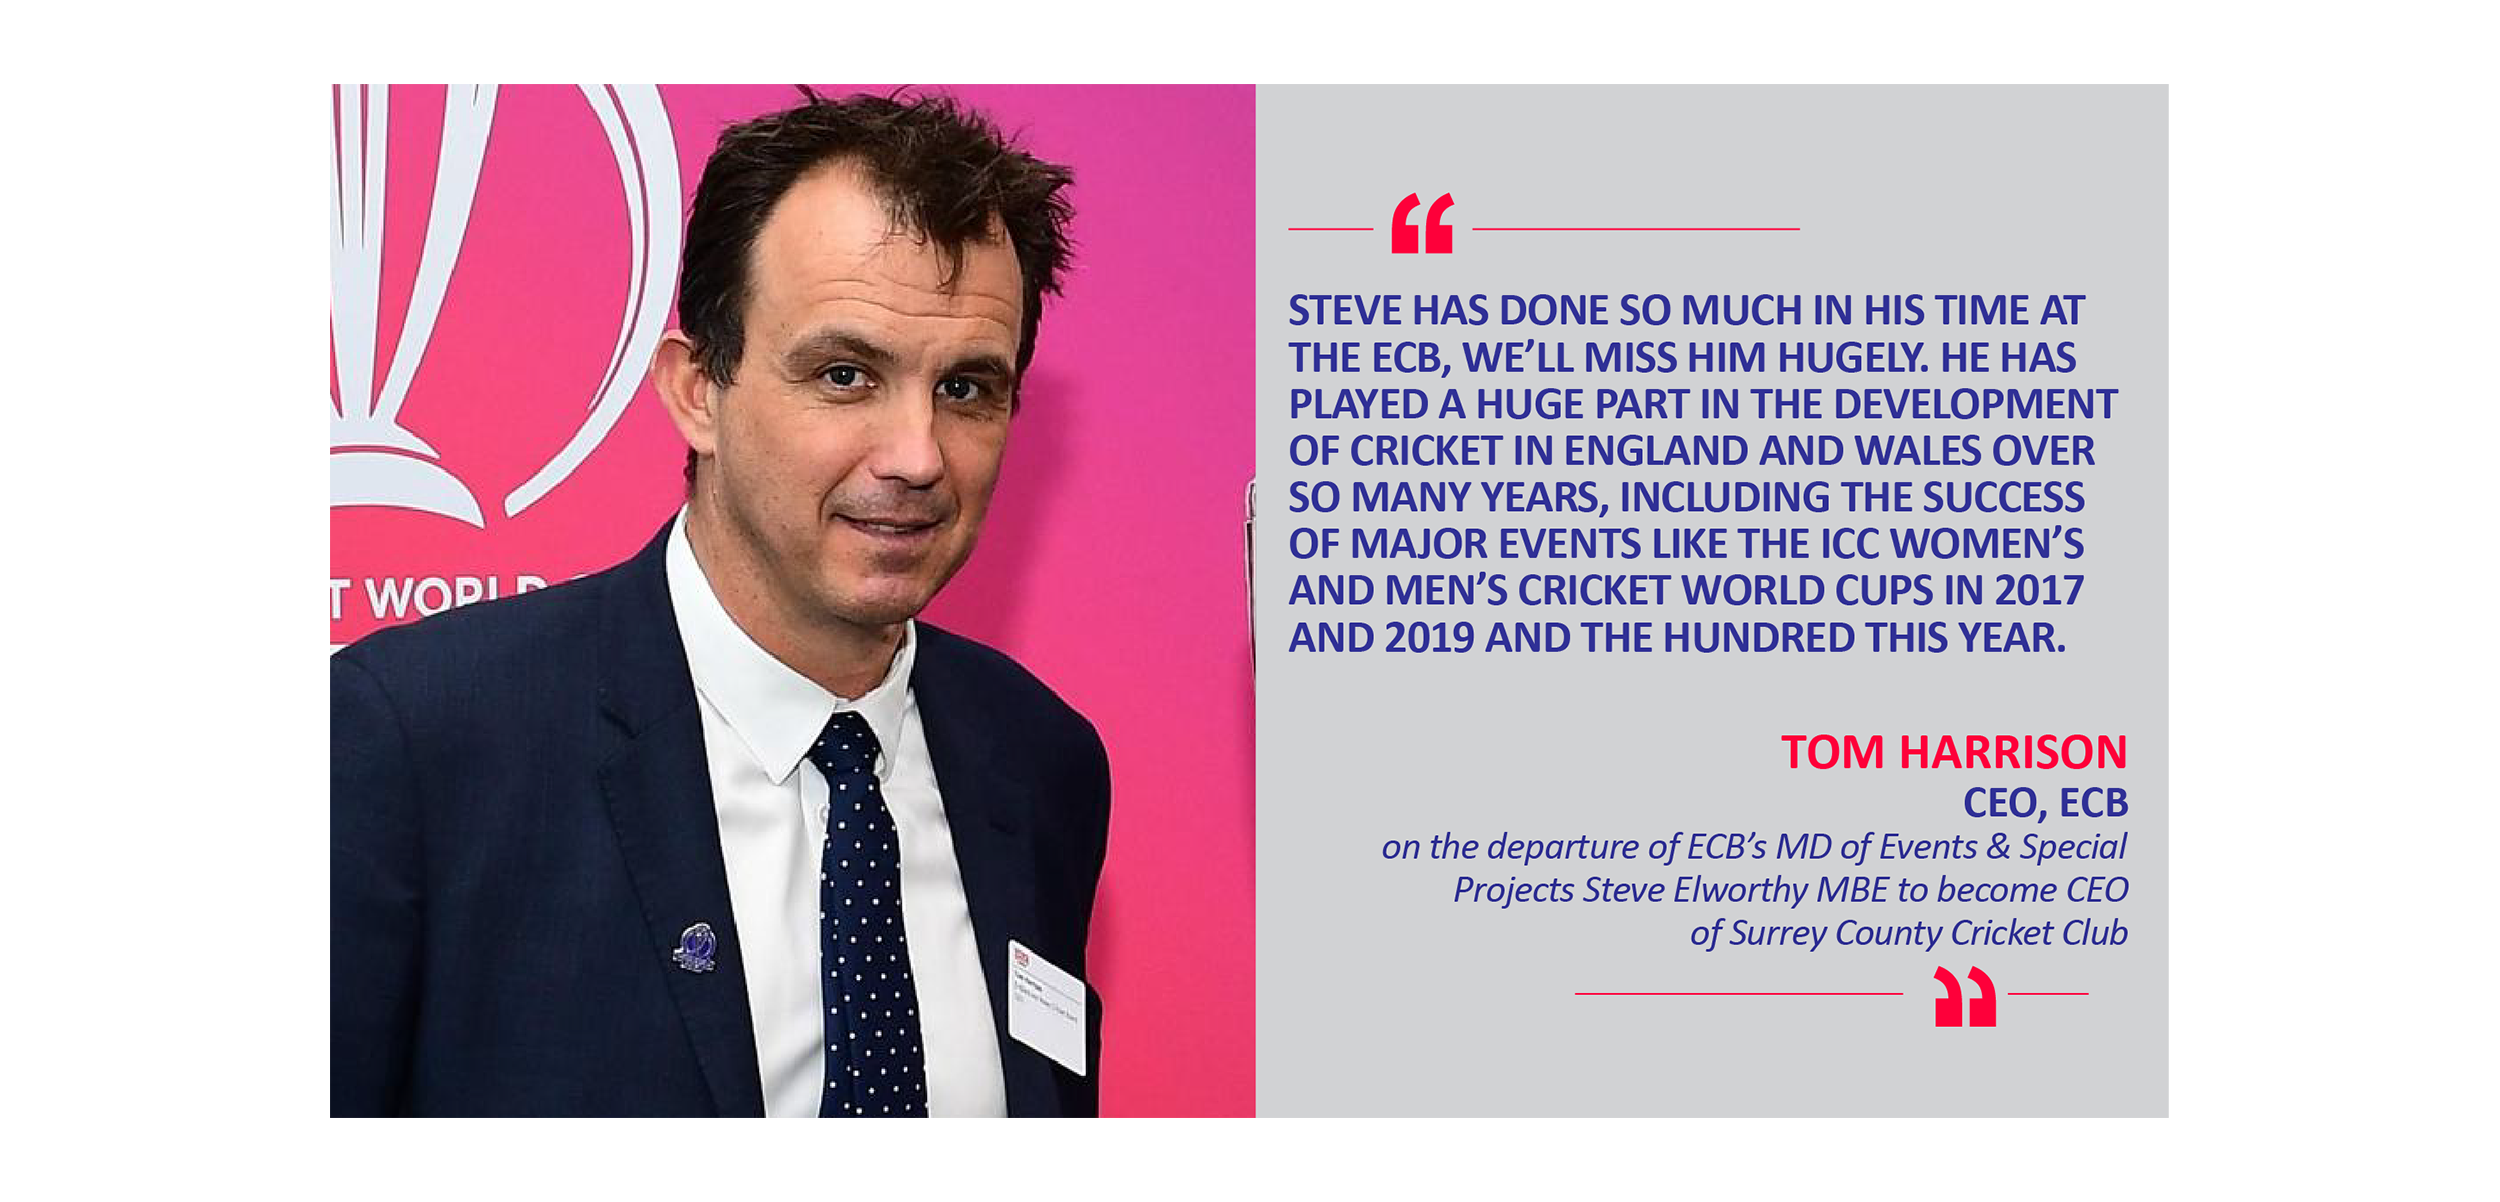 Tom Harrison, CEO, ECB on the departure of ECB’s MD of Events & Special Projects Steve Elworthy MBE to become CEO of Surrey County Cricket Club